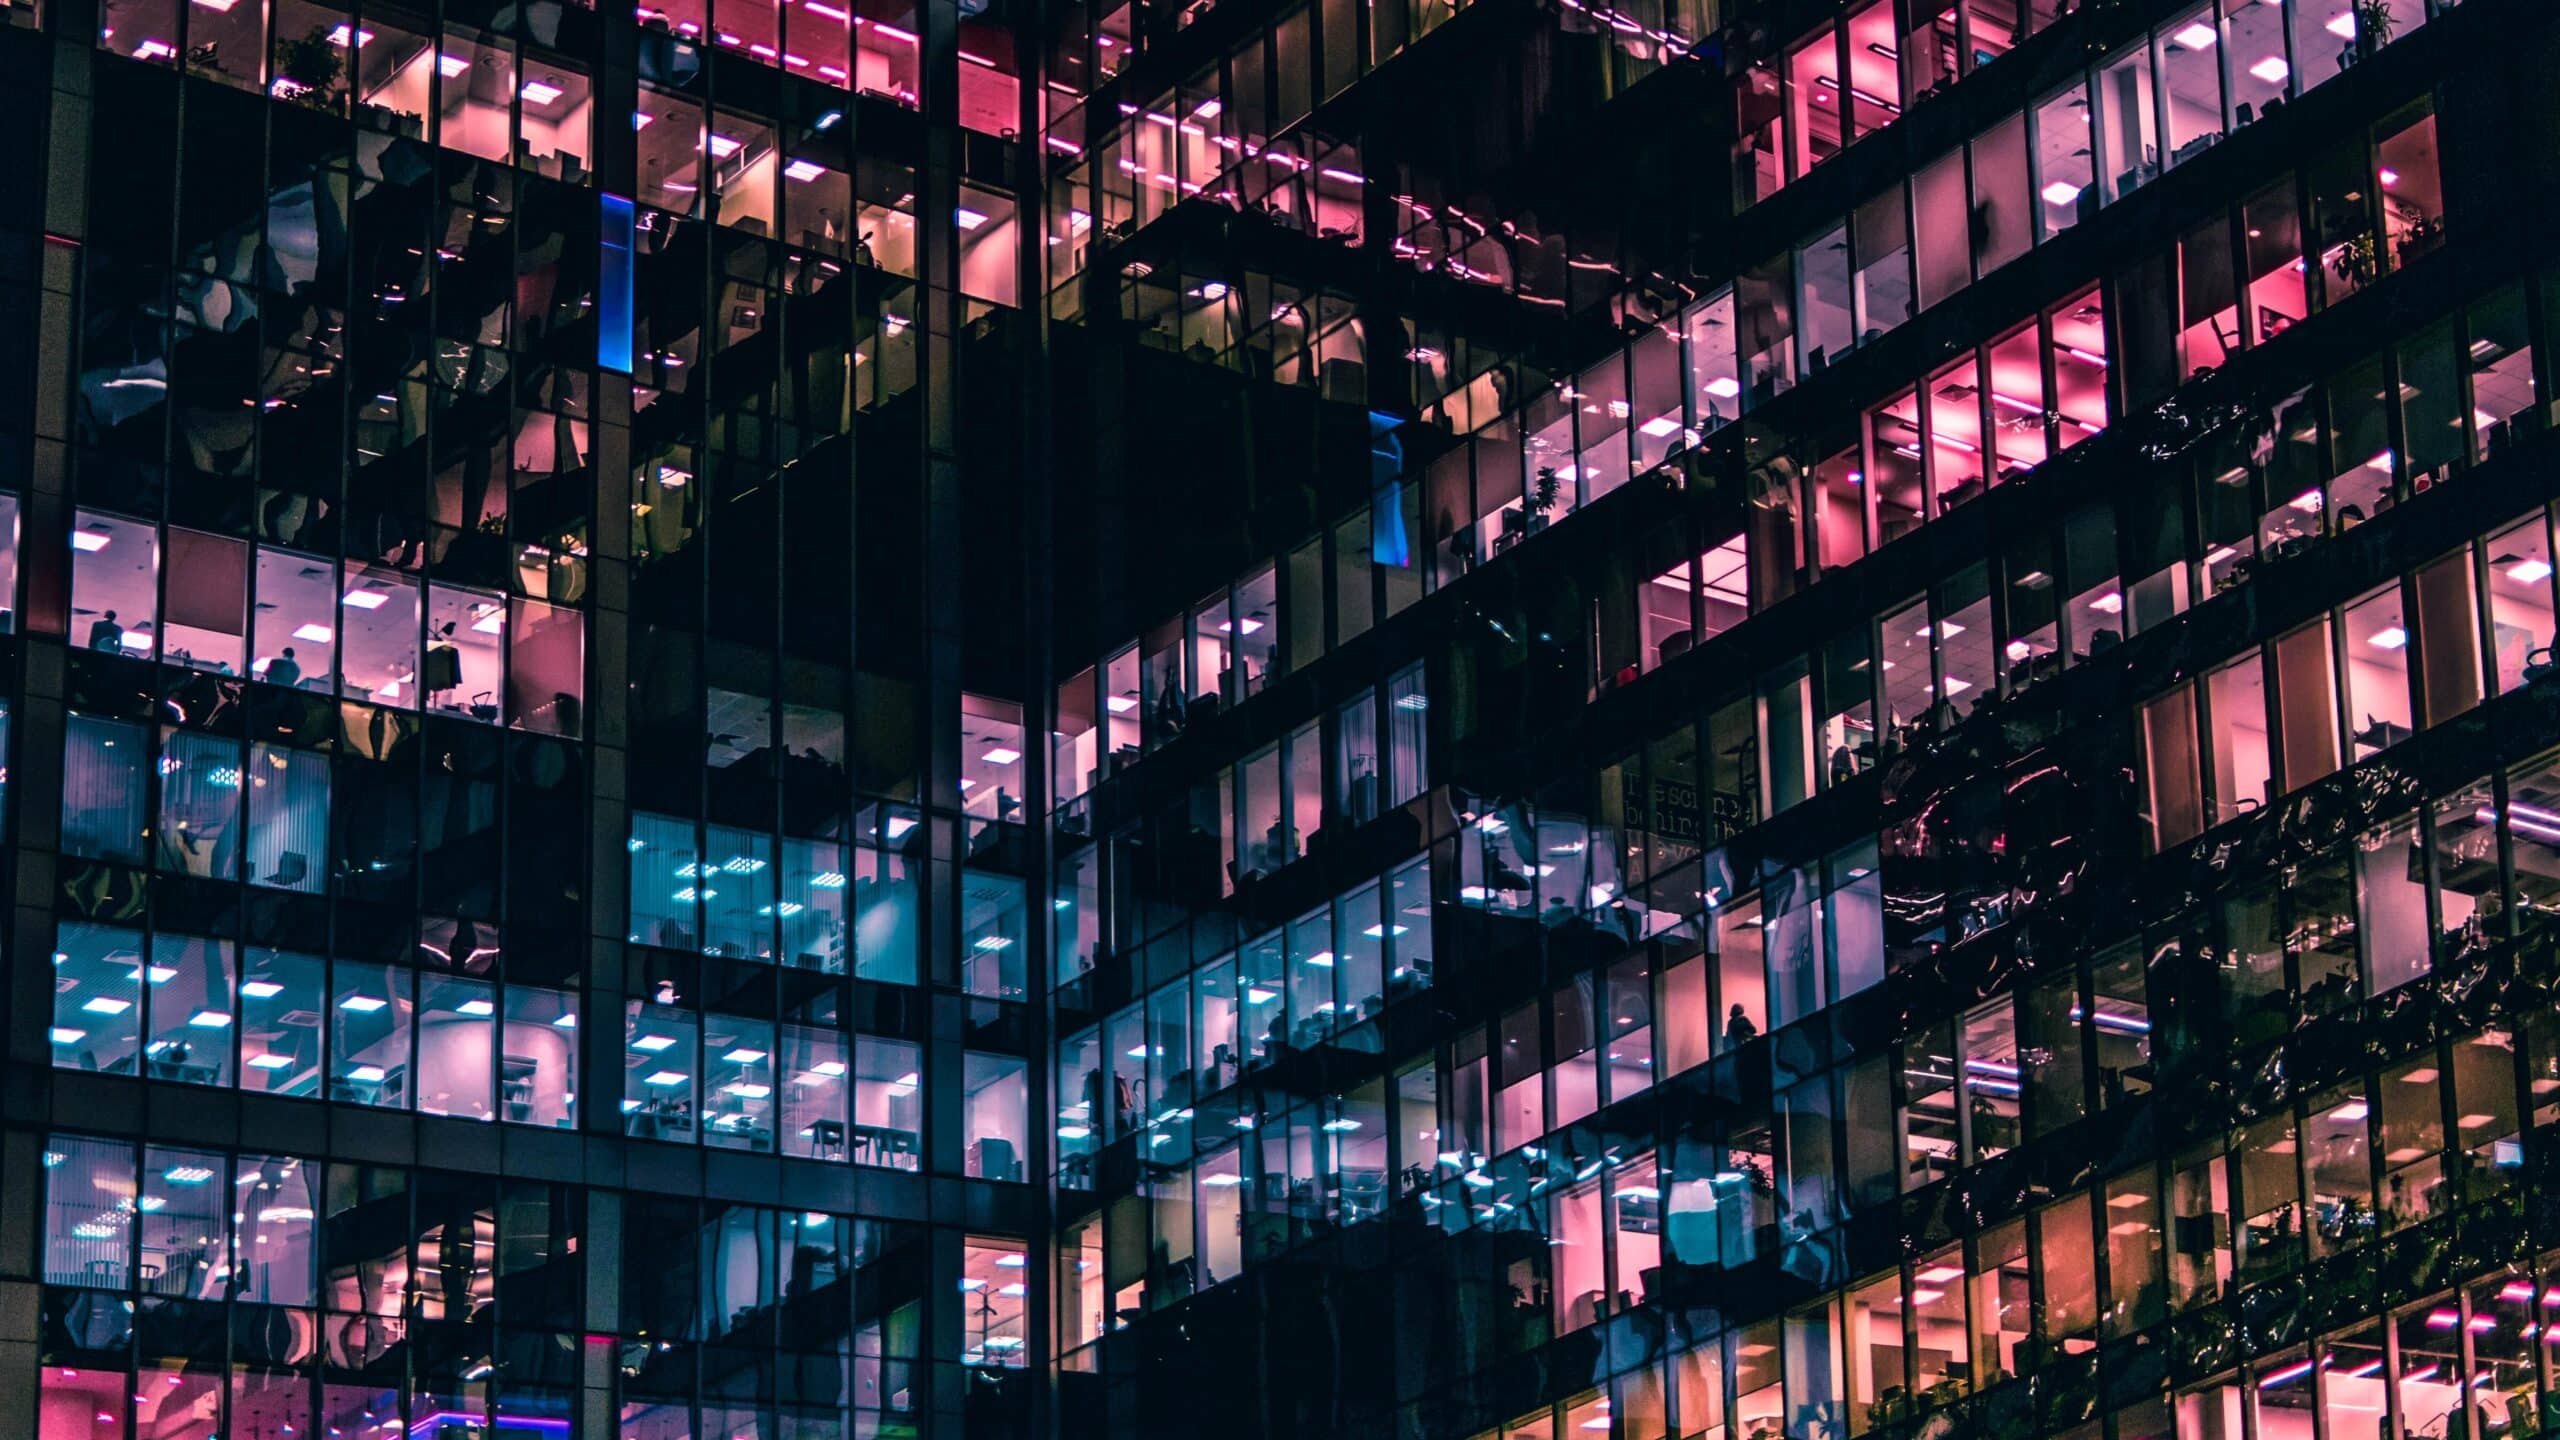 A ground view looking upwards at a lot of different office spaces, high up in an apartment building, with pink and blue lighting